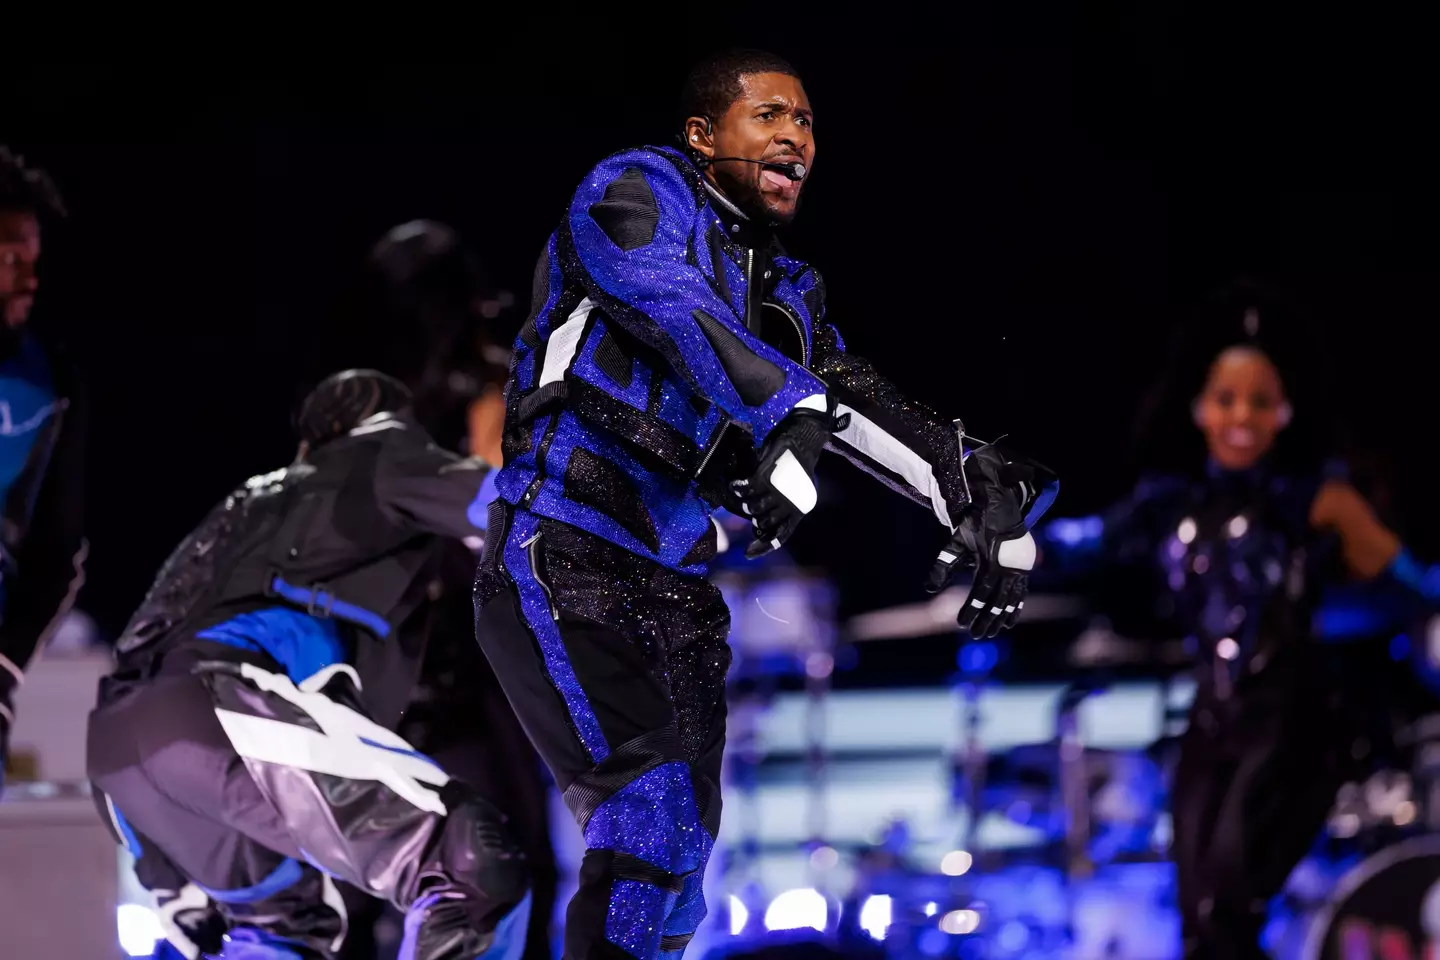 Usher's performance has been dubbed one of the most iconic in Super Bowl history.